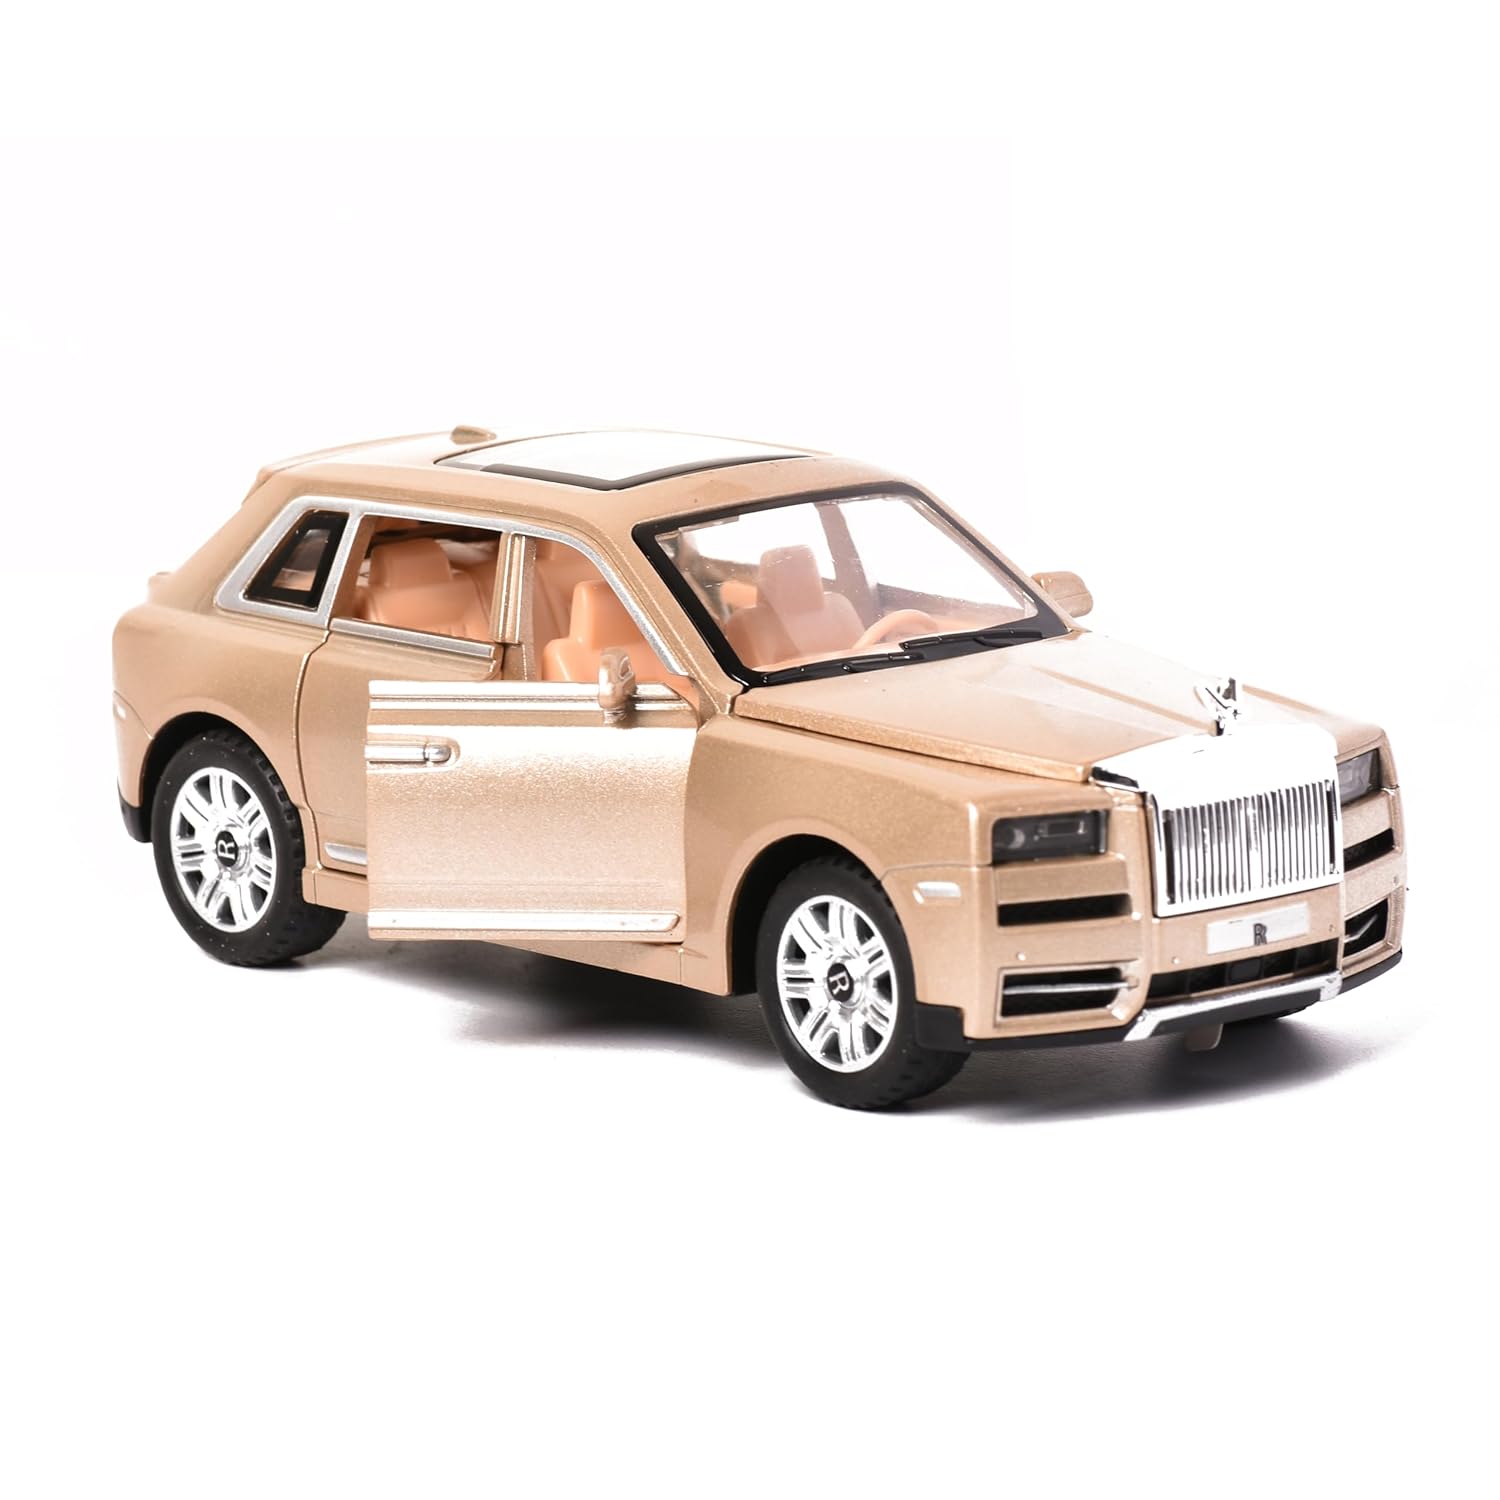 Braintastic Model Diecast Car Toy Vehicle Pull Back Friction Car with Openable Doors Light & Music Toys for Kids Age 3+ Years (Rolls Royce Beige)